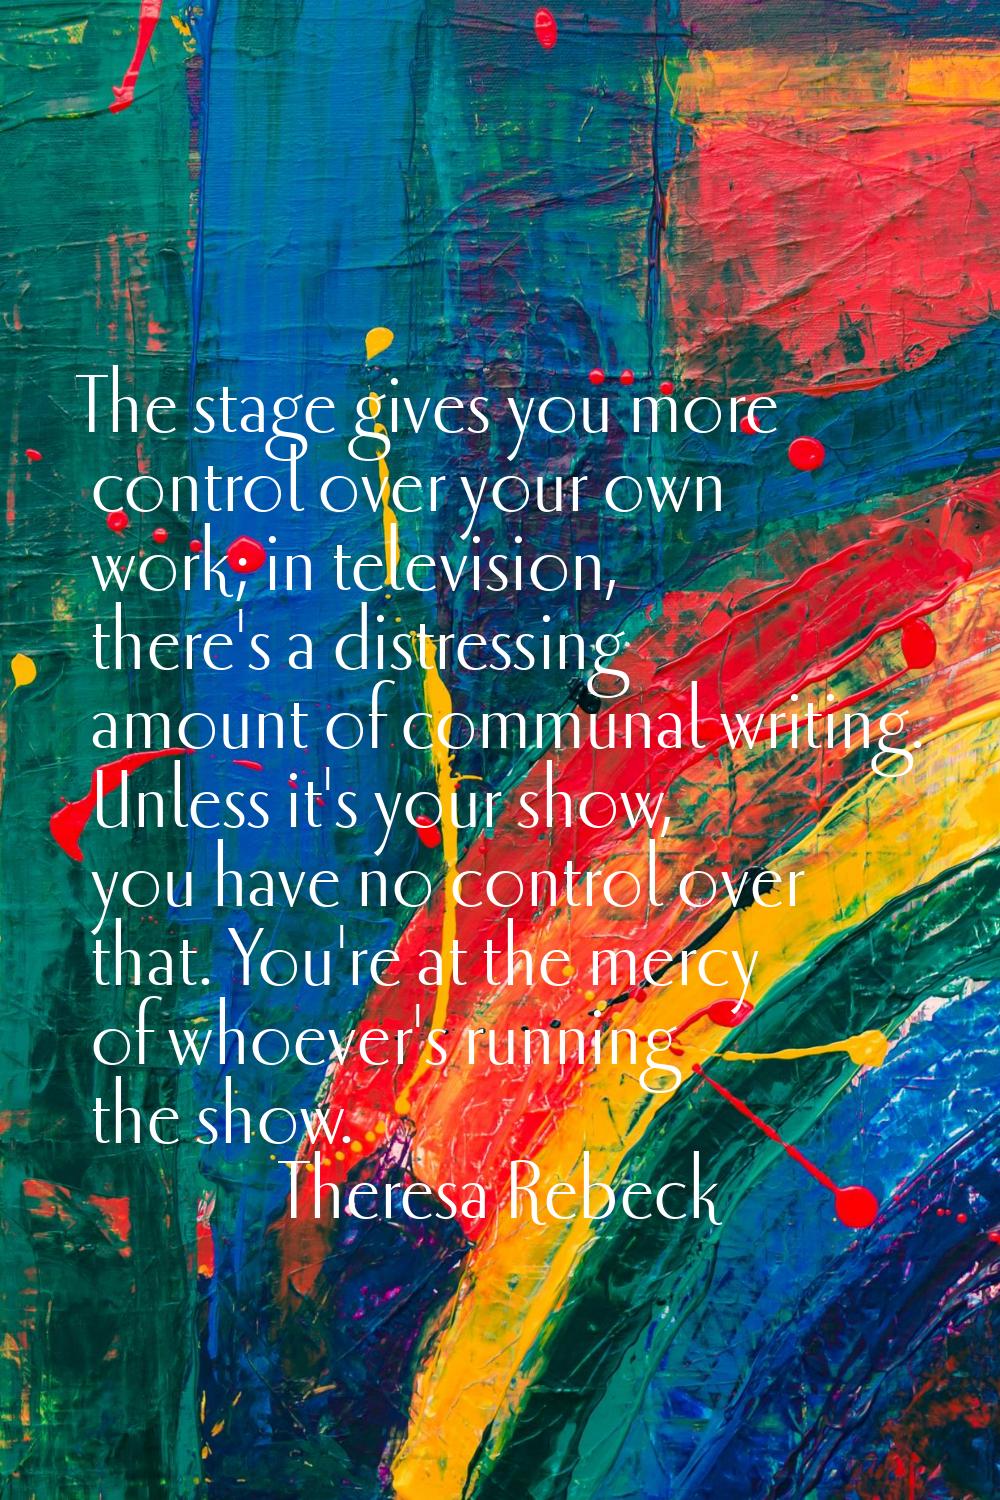 The stage gives you more control over your own work; in television, there's a distressing amount of